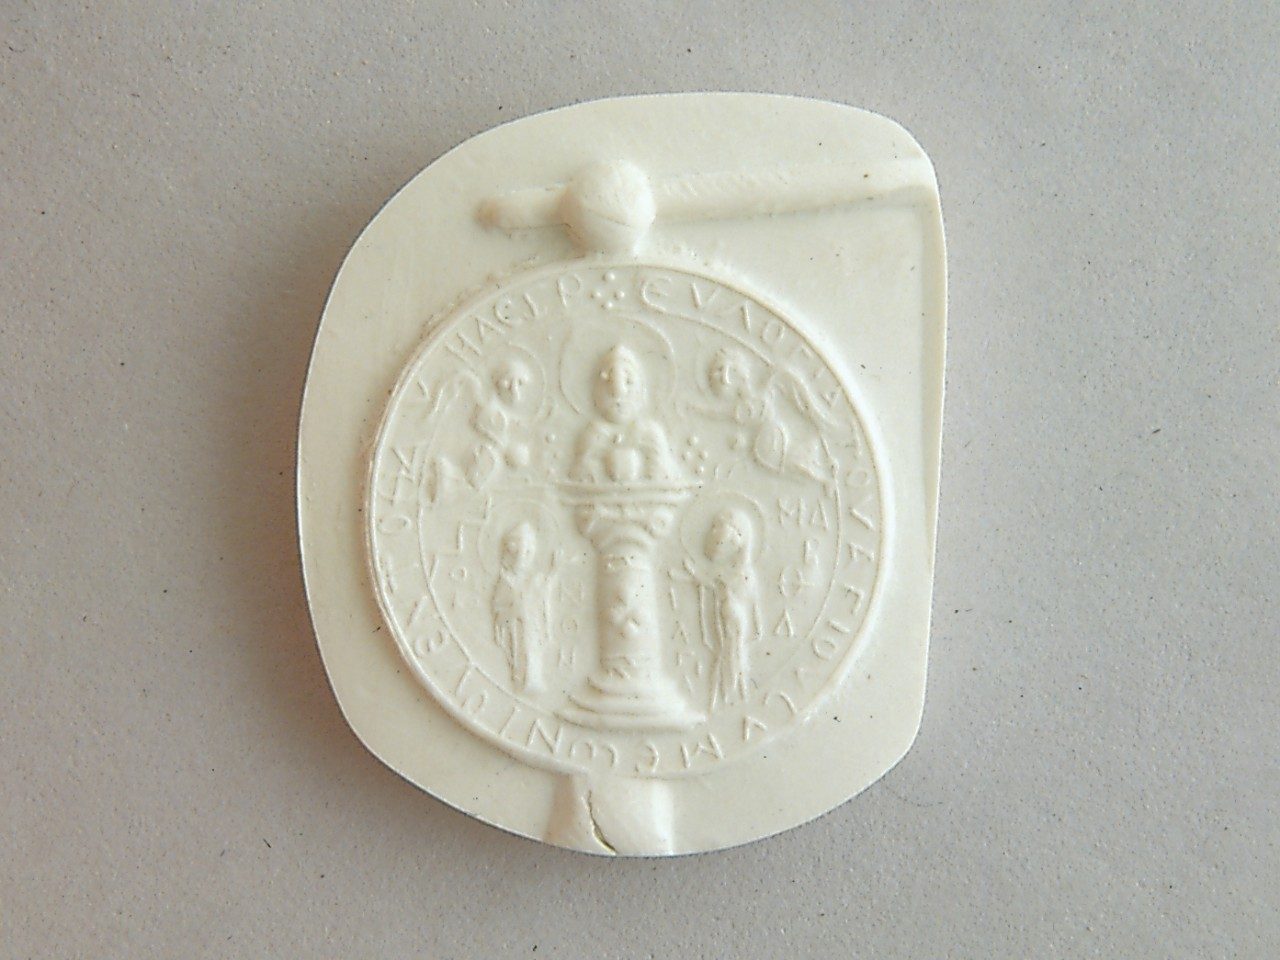 White steatite mold with a raised pattern featuring a monk (Simeon), angels, and two human figures flanking him.